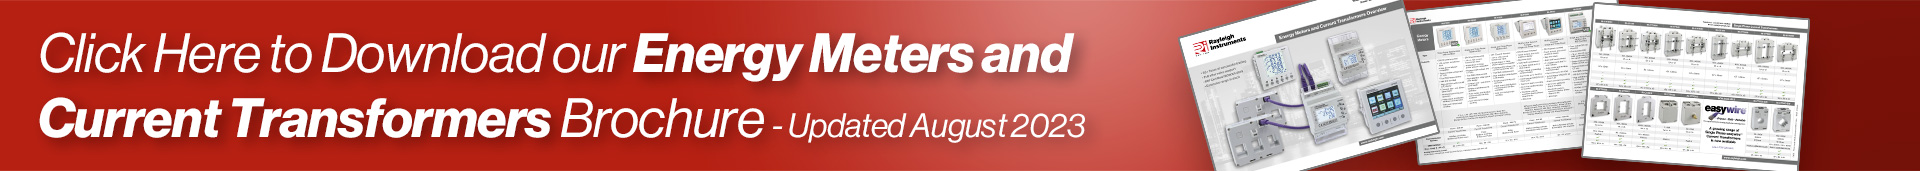 Click Here to Download our Energy Meters and Current Transformers Brochure